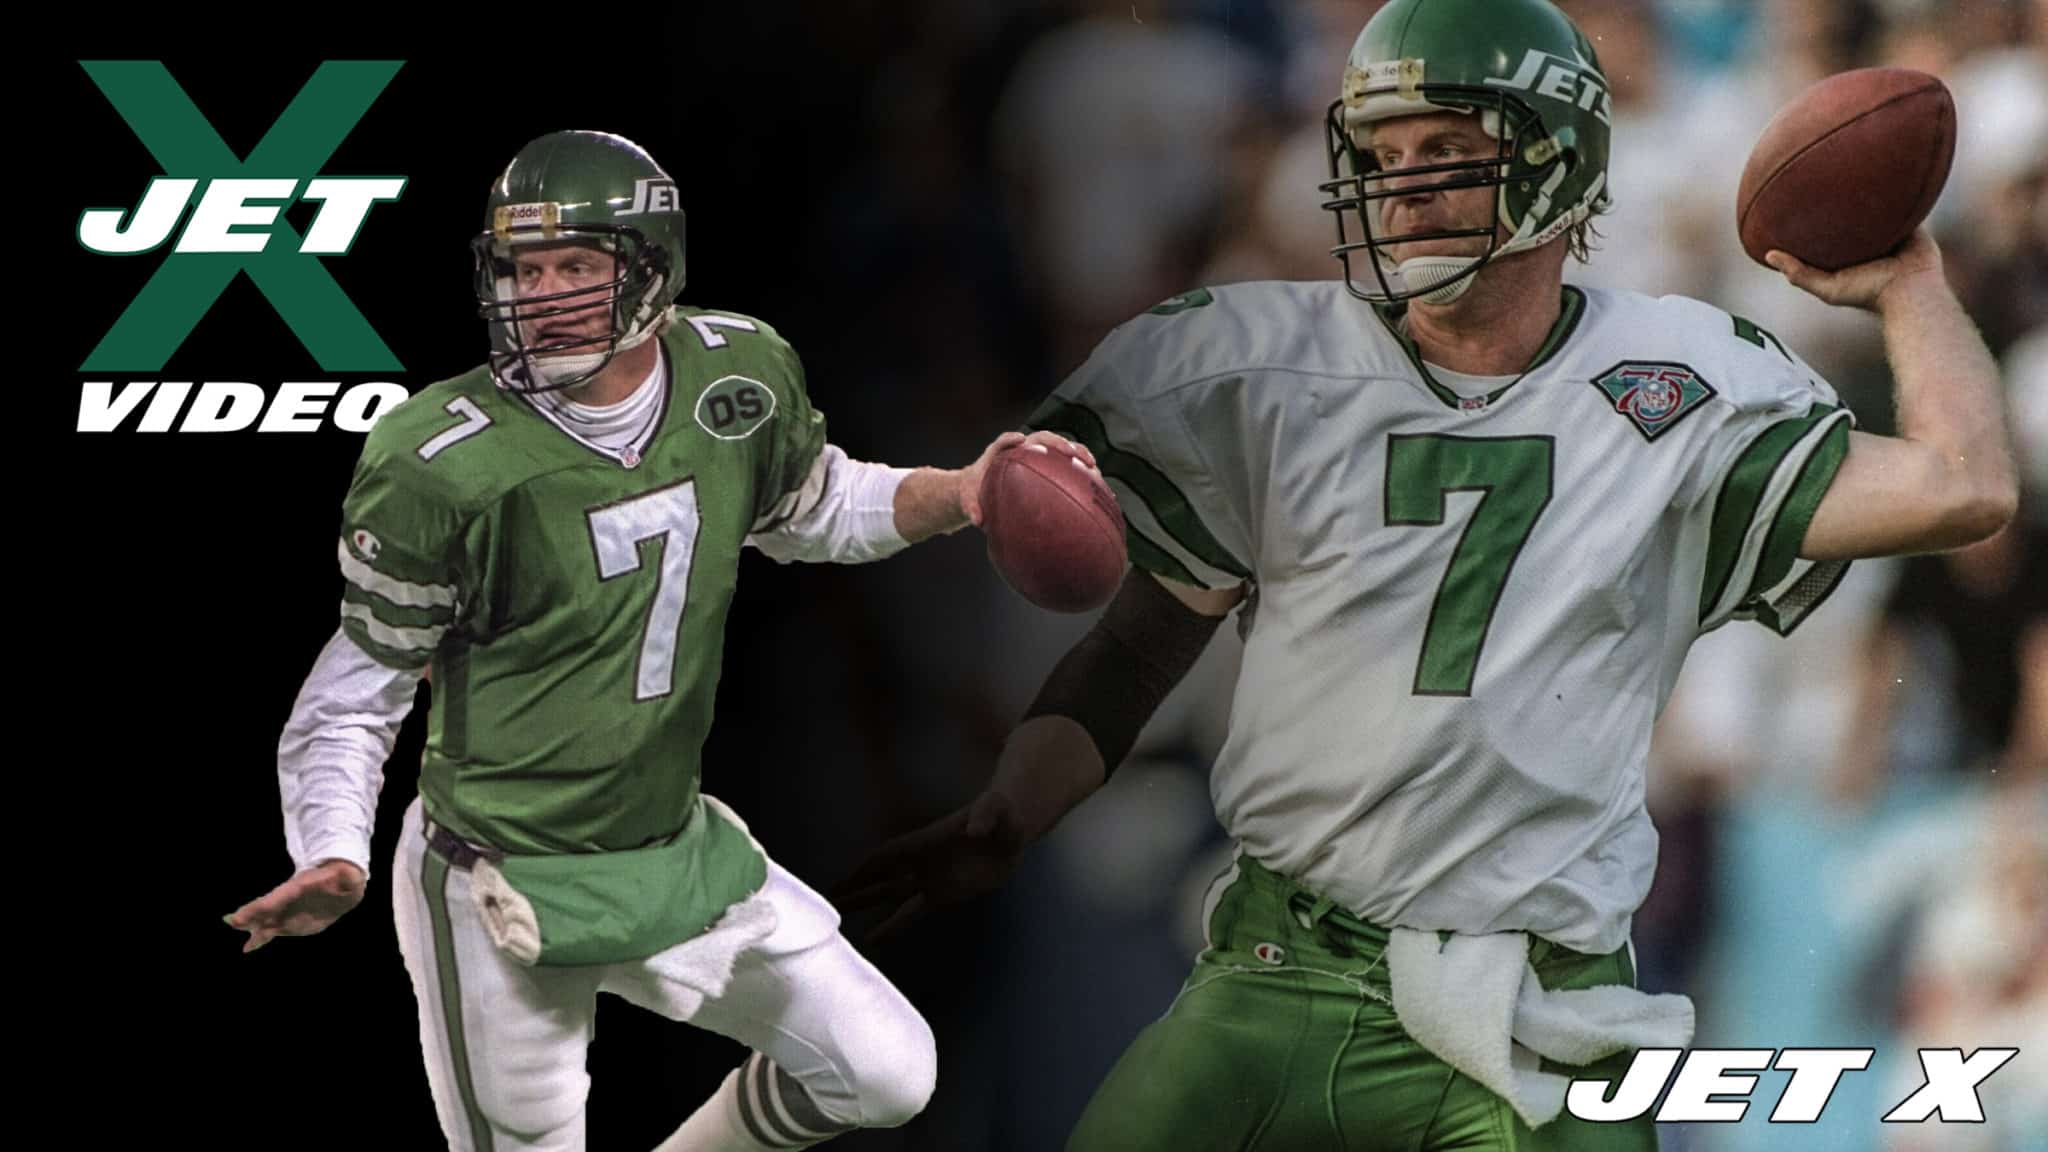 New York Jets, Boomer Esiason, Phil Simms and the NFL on TNT